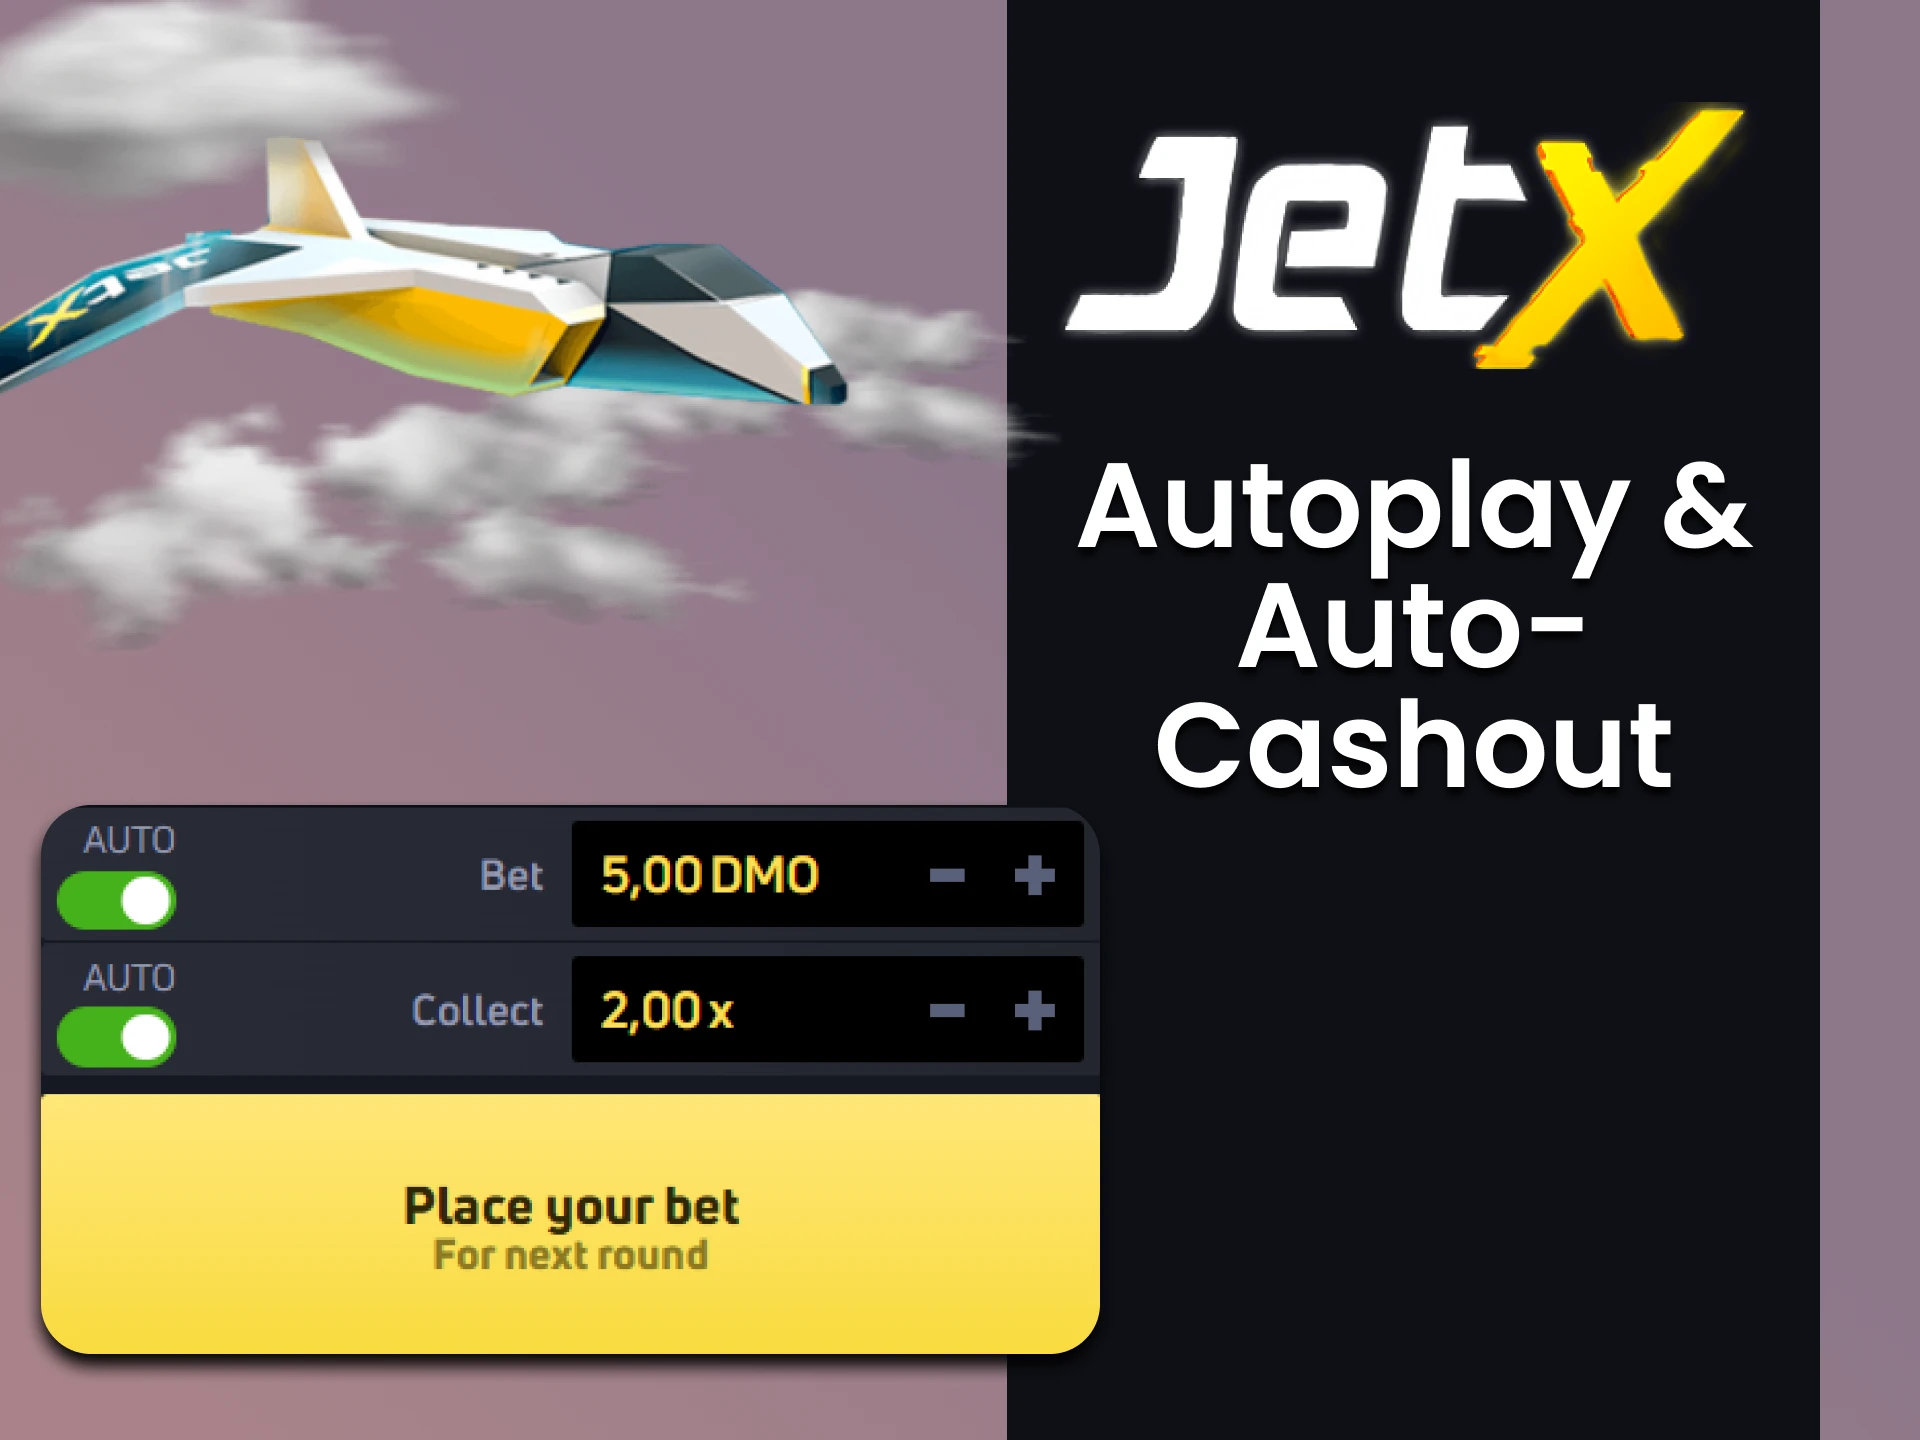 Use the auto format to play JetX.